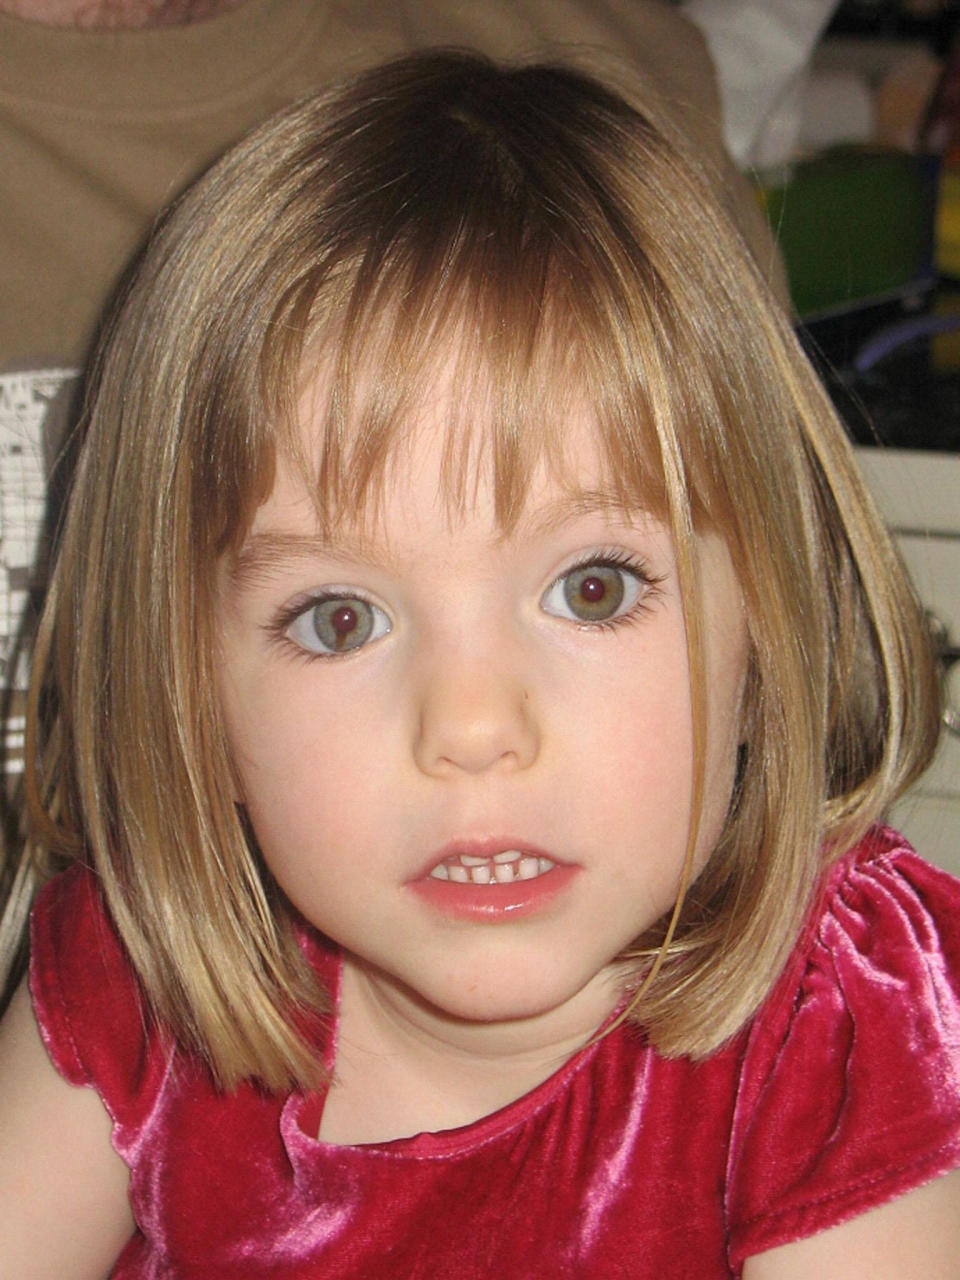 In 2007, then three-year-old Madeleine McCann vanished from her holiday apartment in the Portugal. Source: Pa